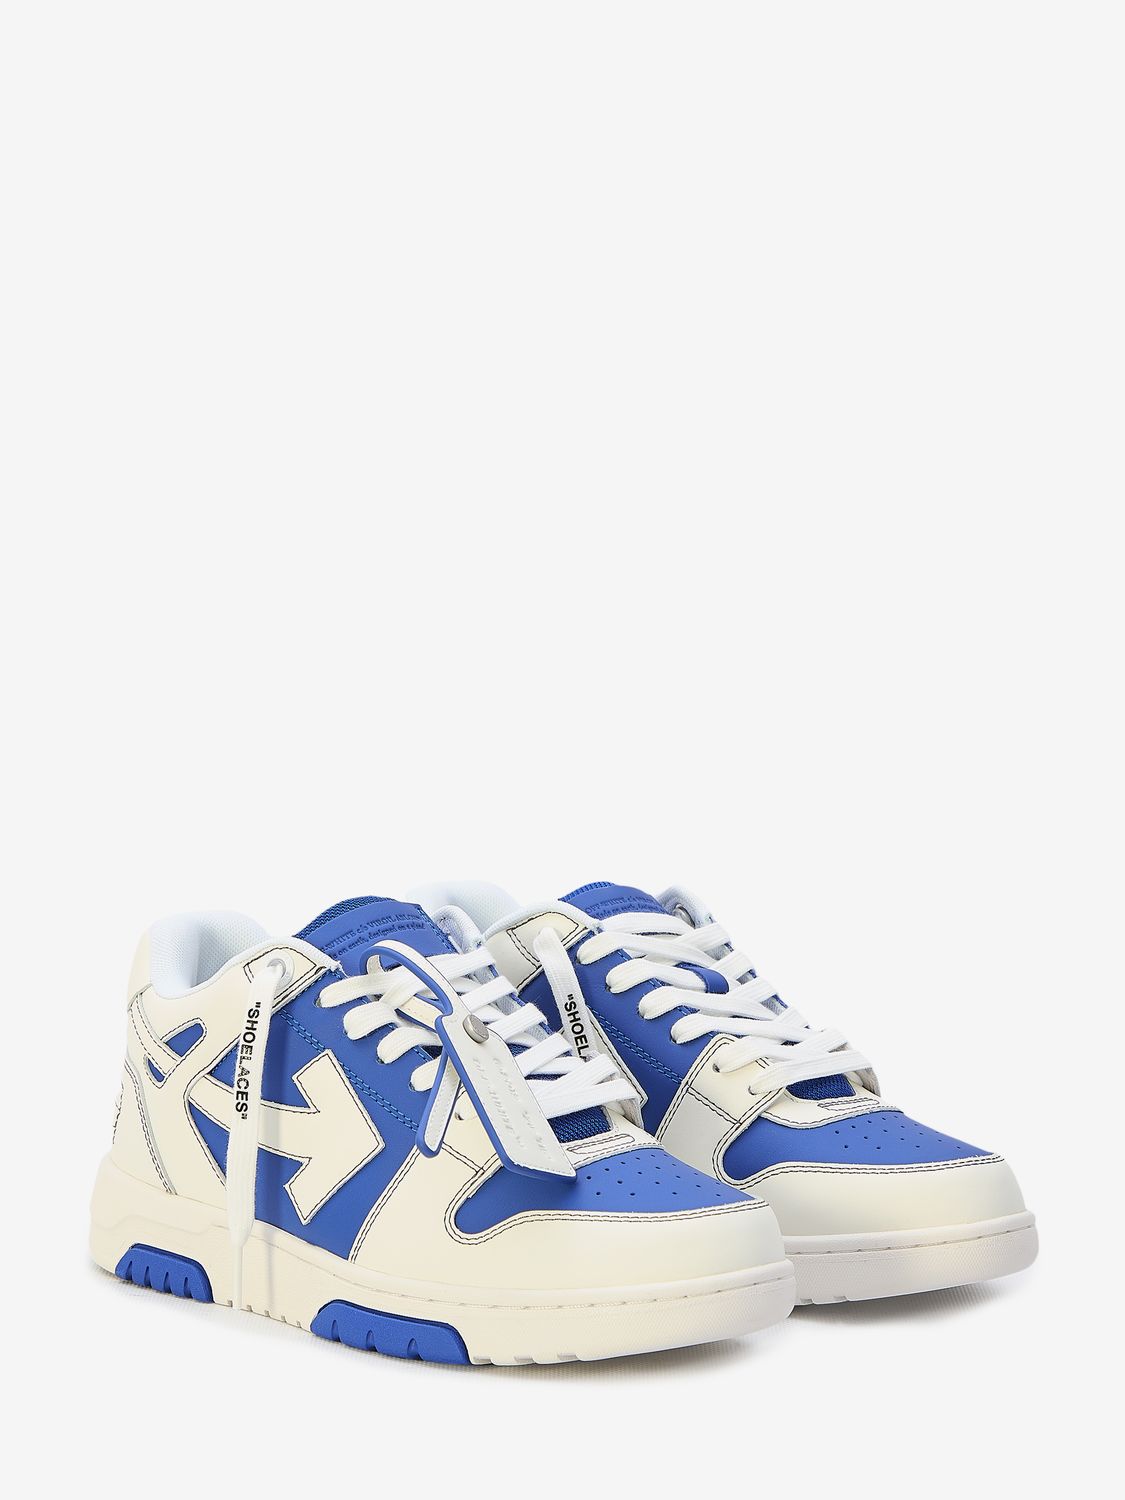 OFF-WHITE Navy White Leather Sneakers for Men